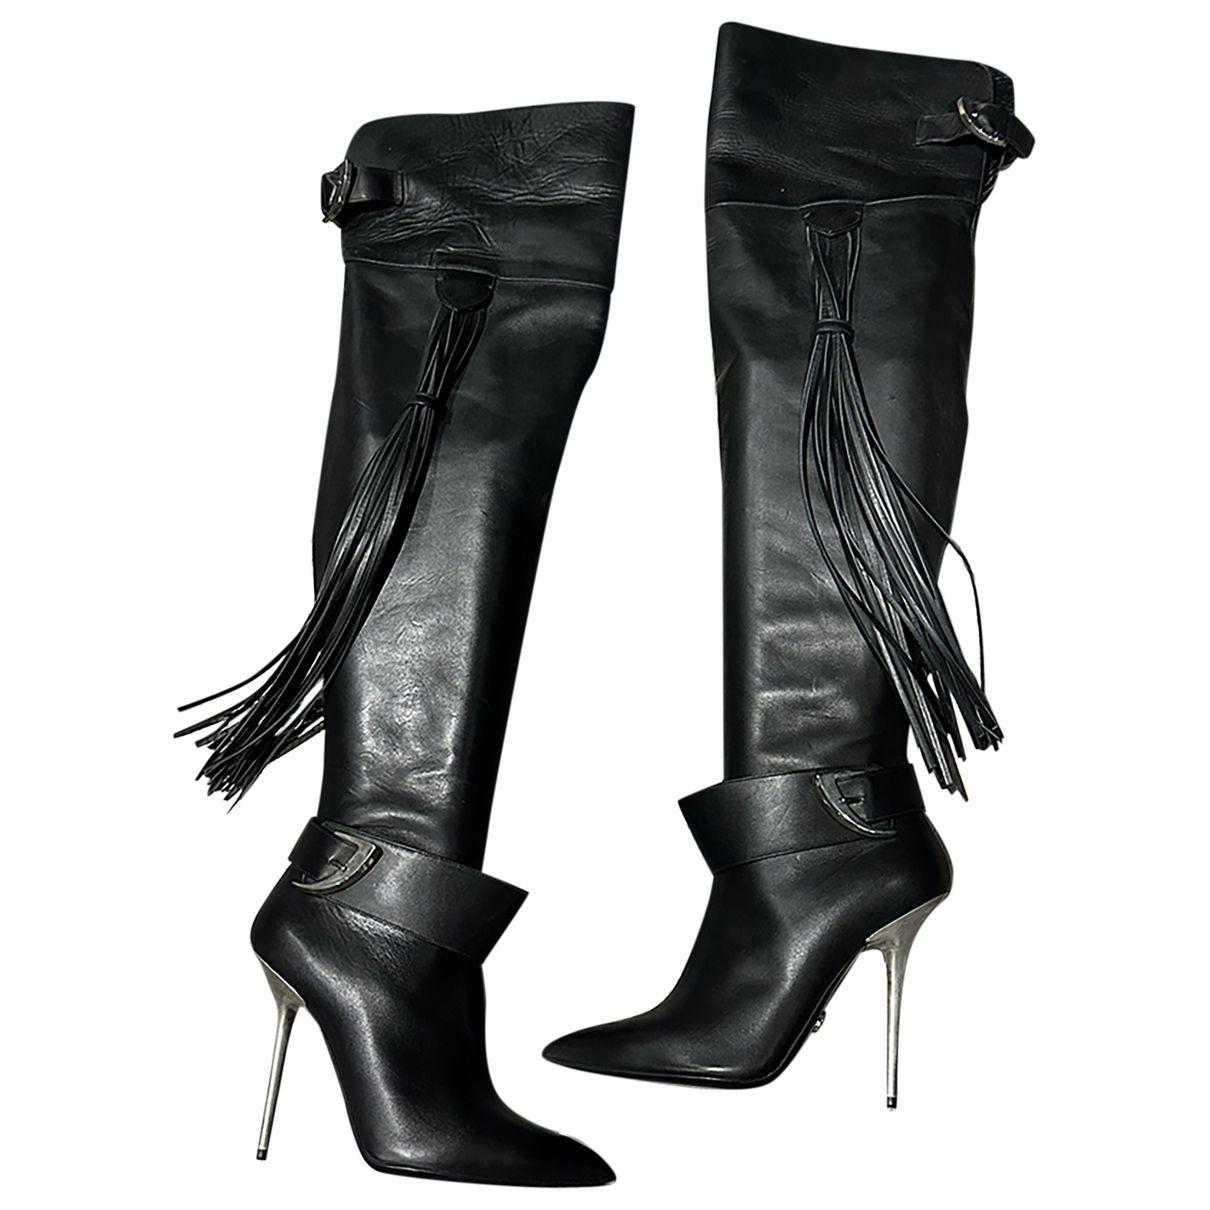 Leather riding boots by VERSACE